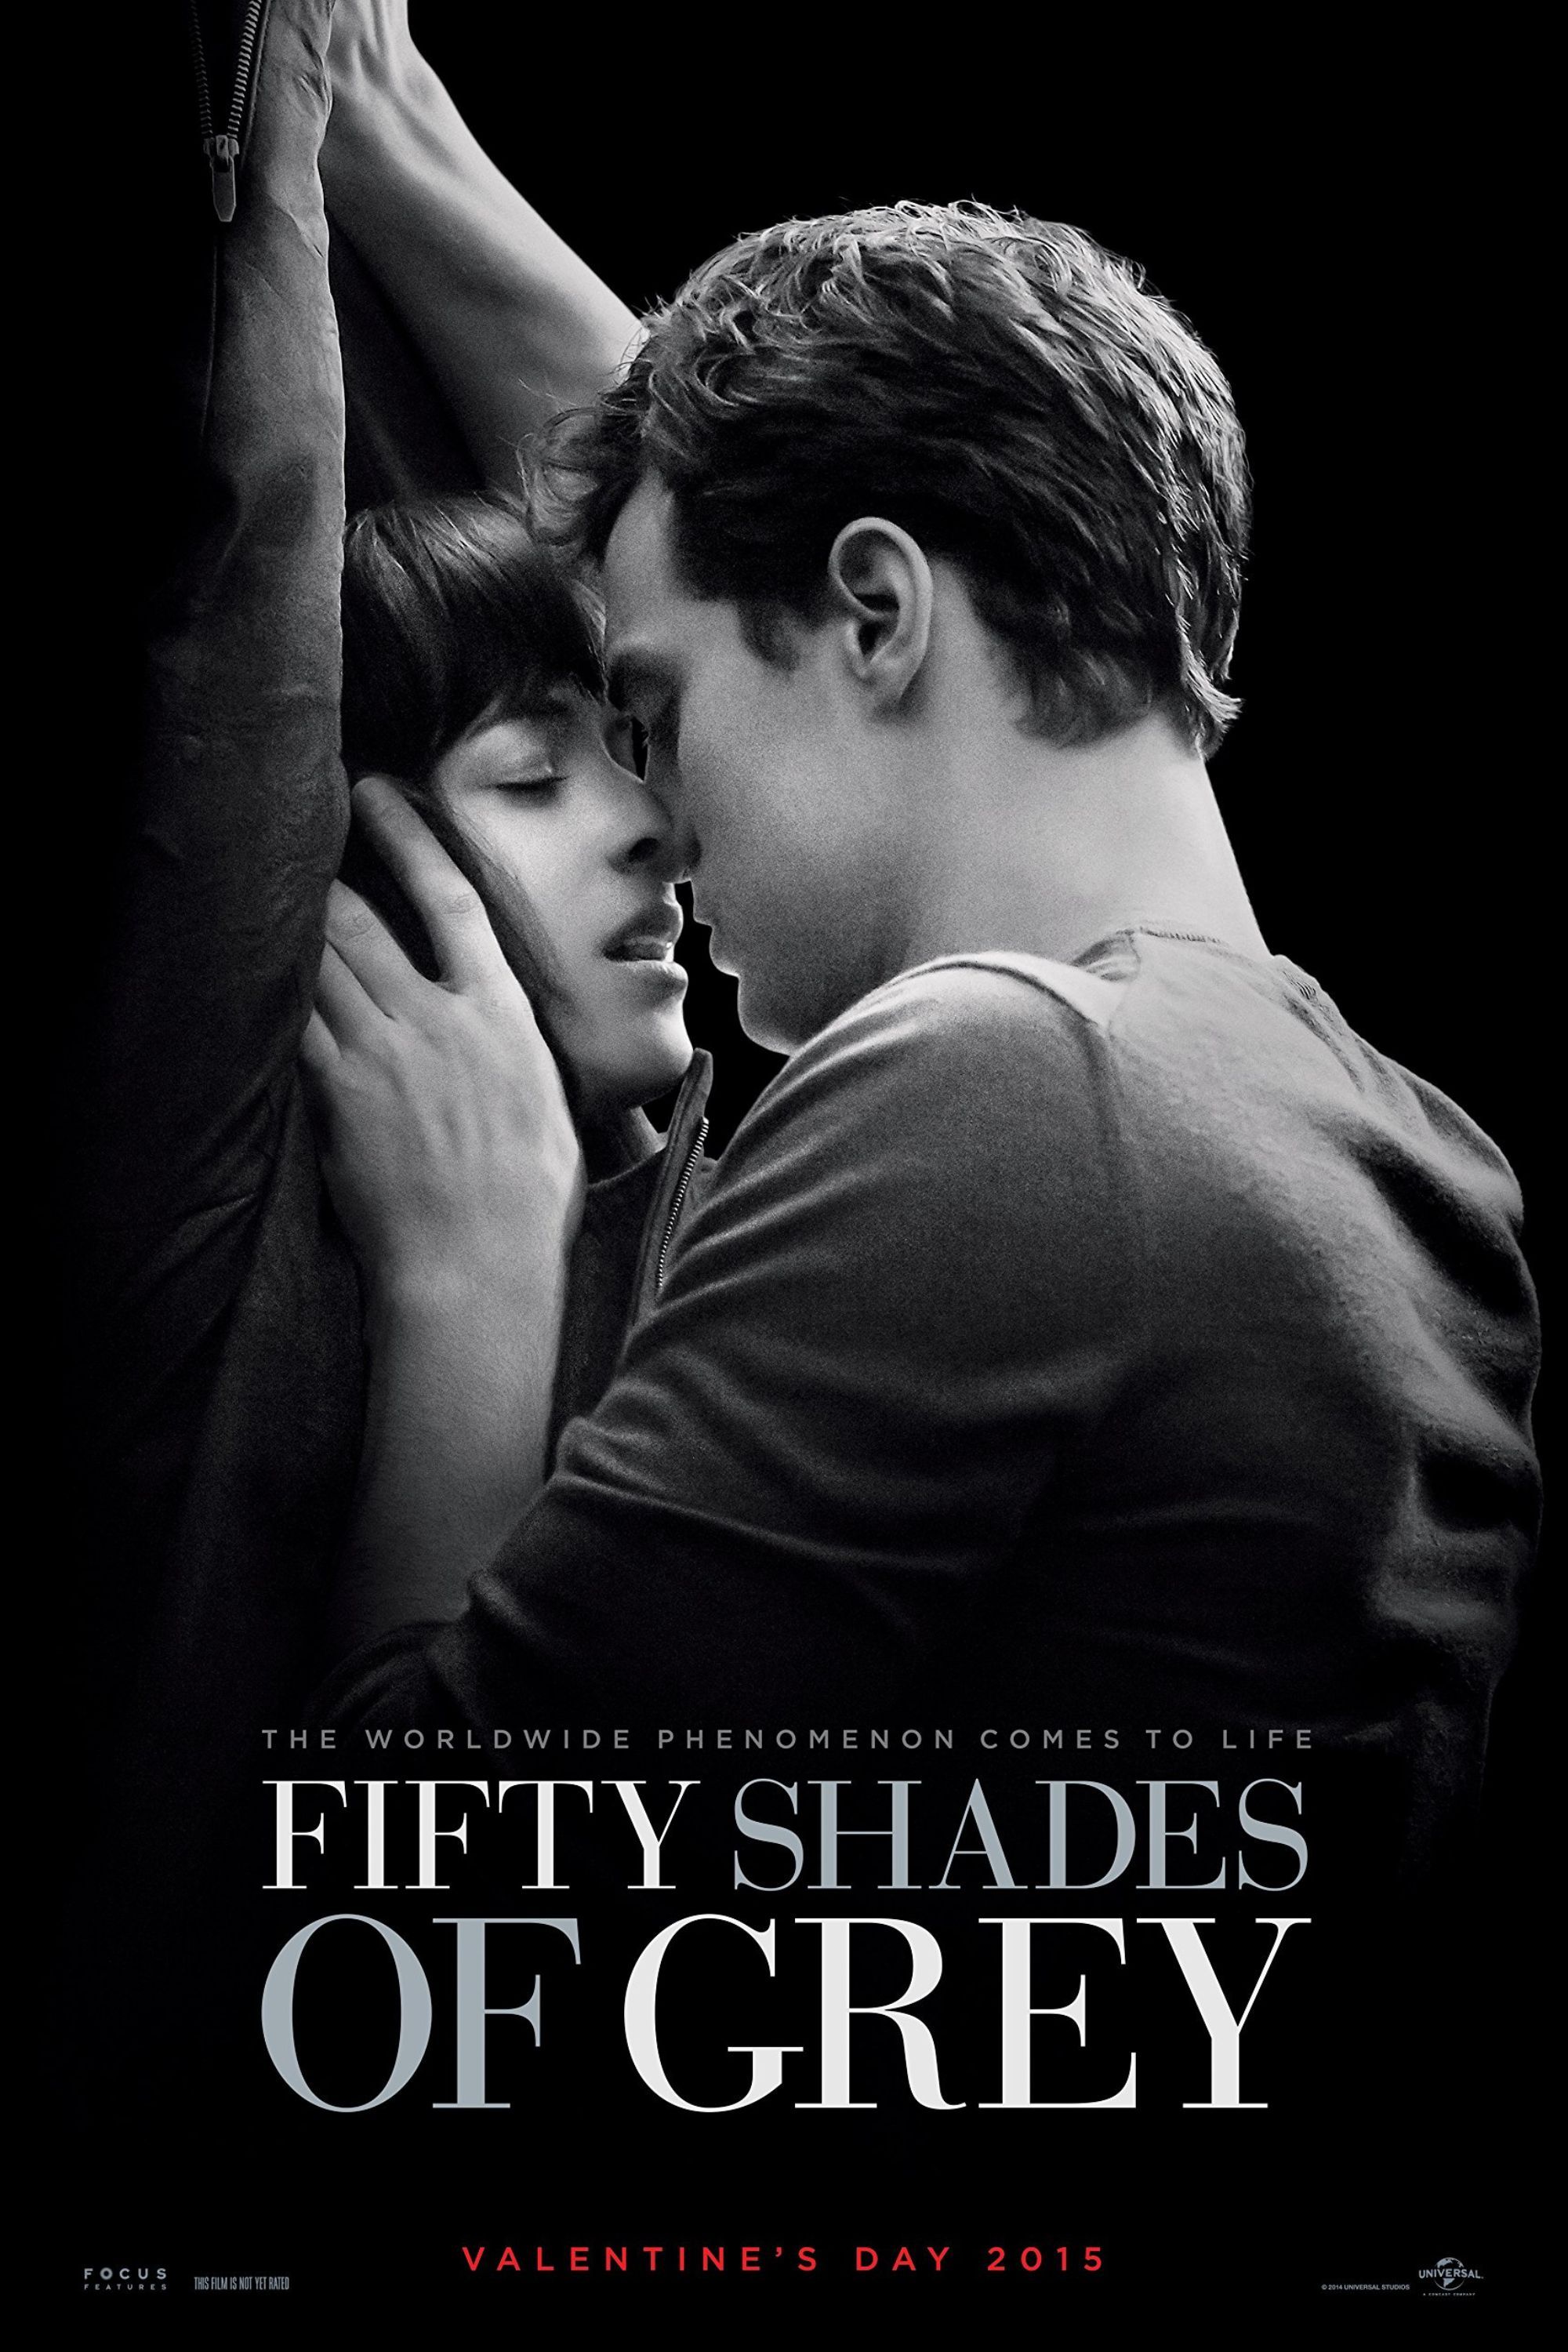 The Fifty Shades of Grey trilogy is available to buy or rent on many streaming platforms.